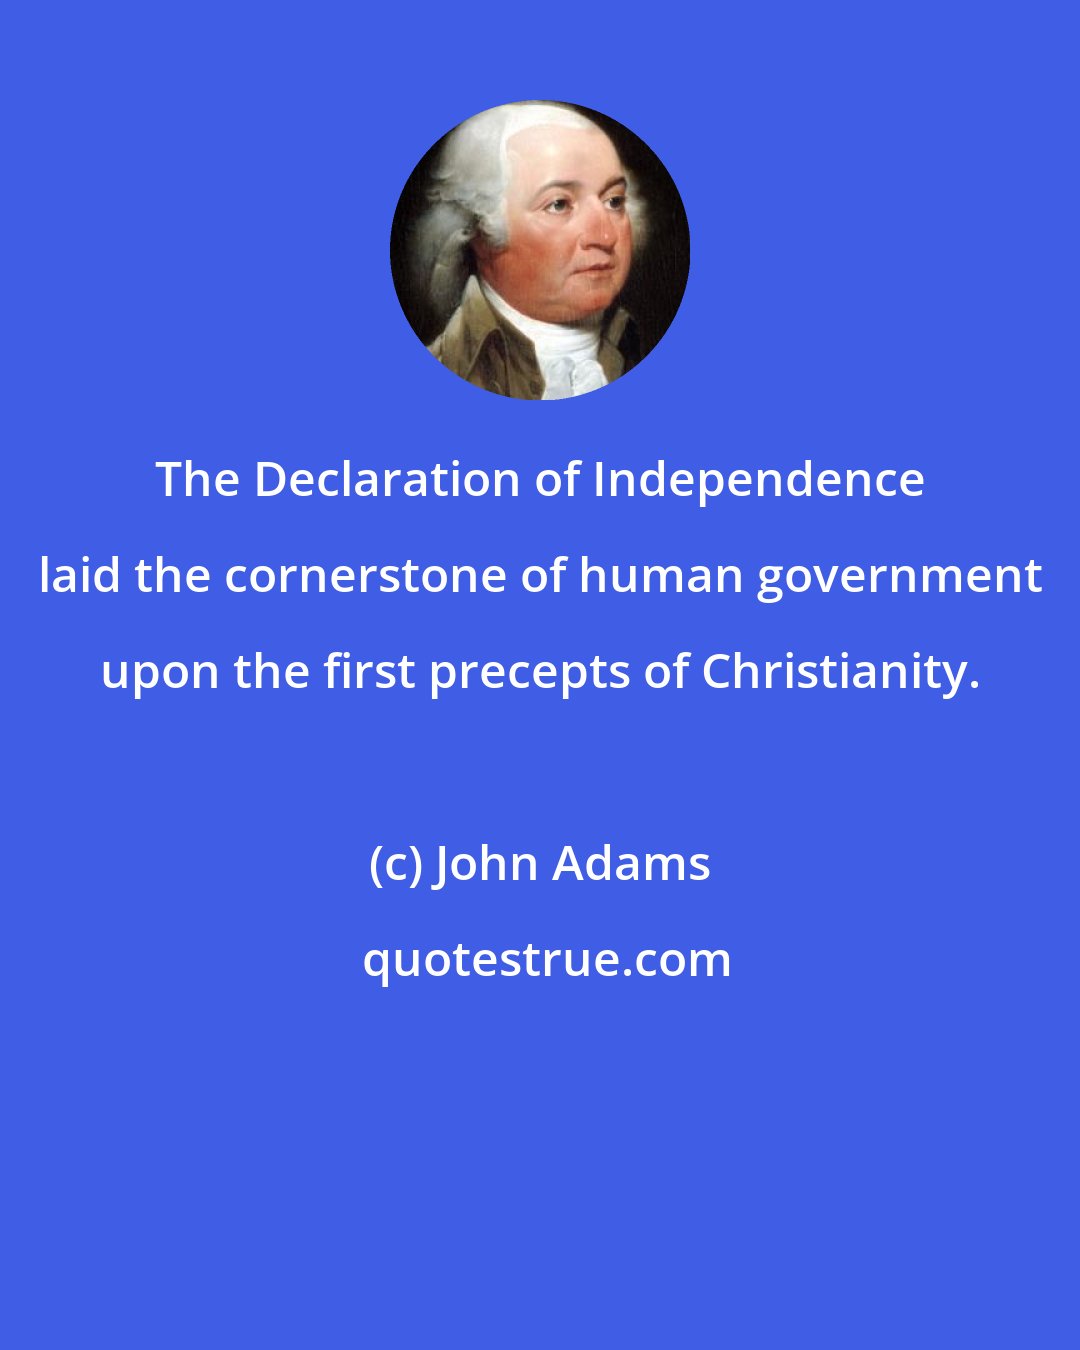 John Adams: The Declaration of Independence laid the cornerstone of human government upon the first precepts of Christianity.